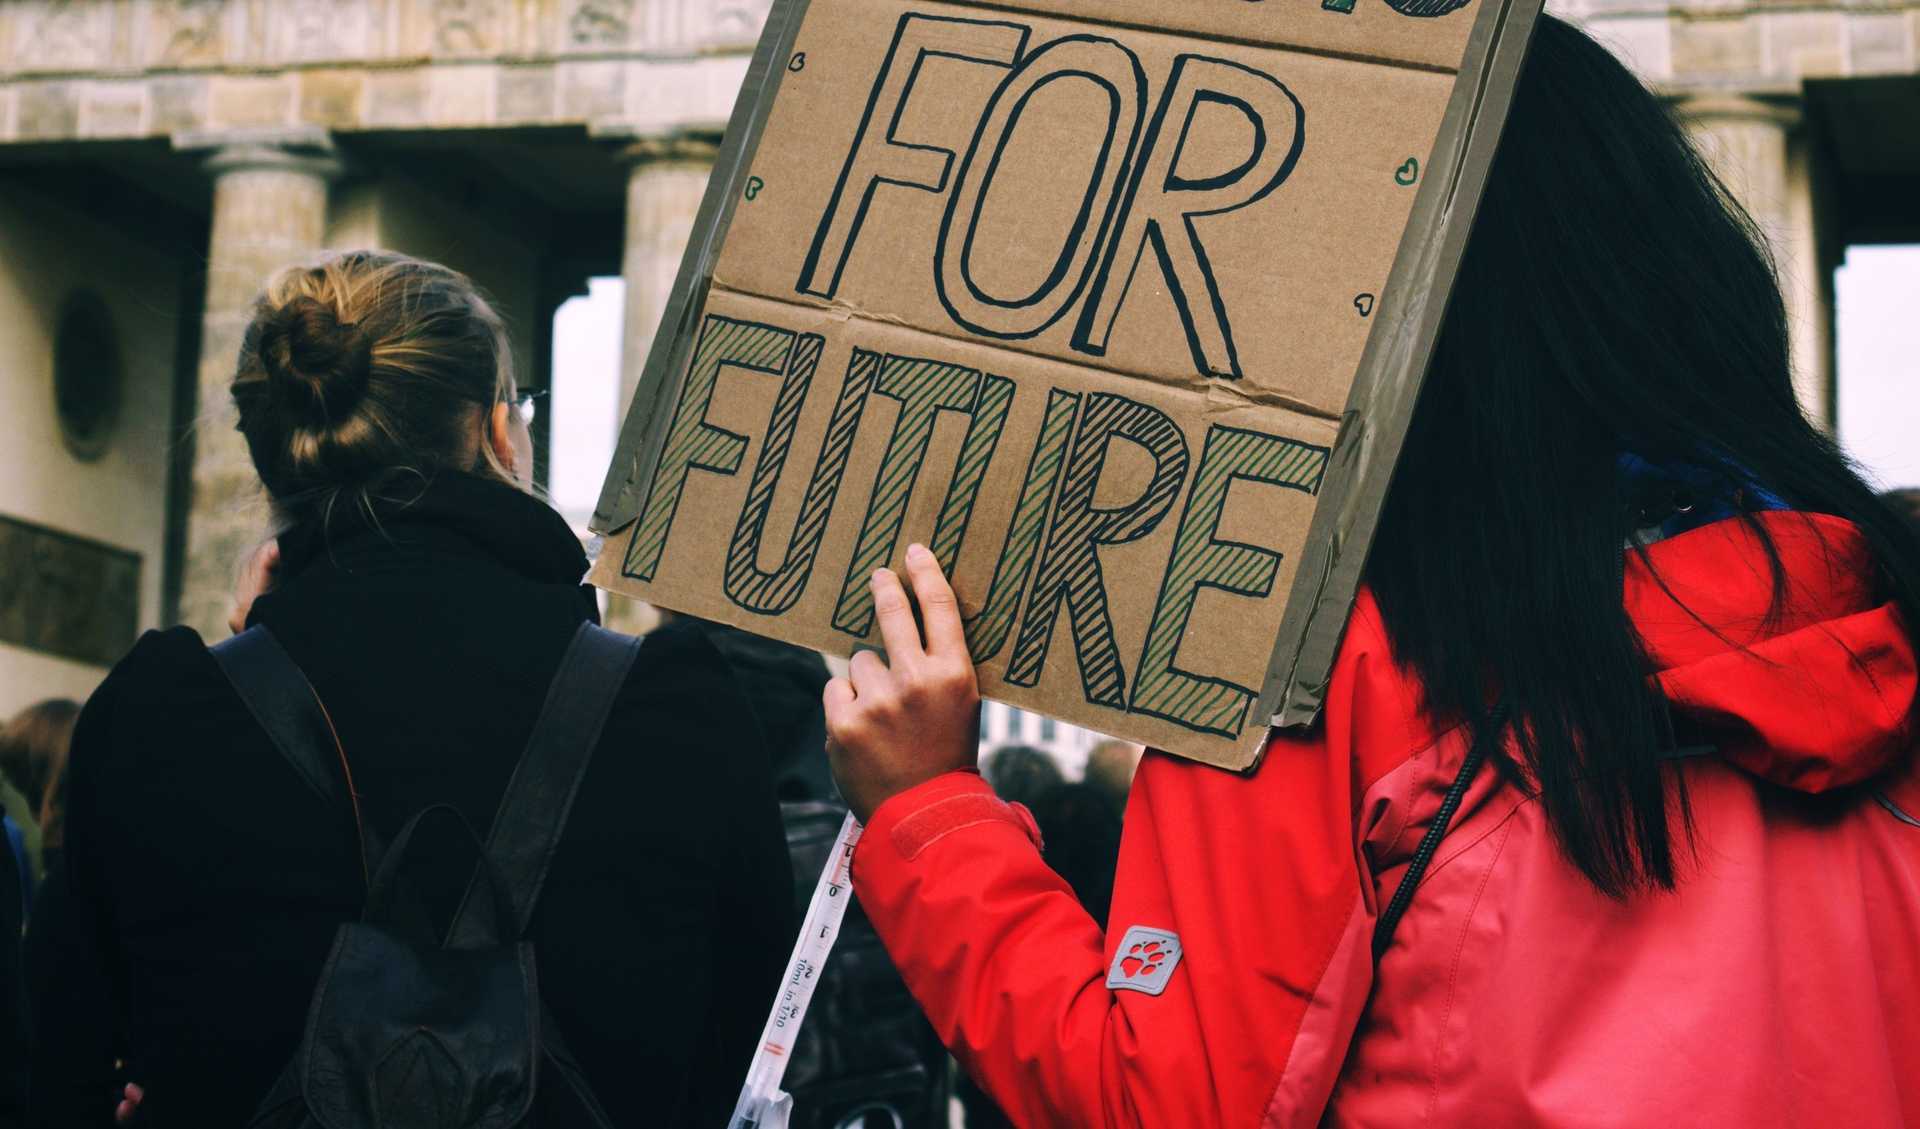 A person is hoding a selmade protest slogan on which "For Future" is written.